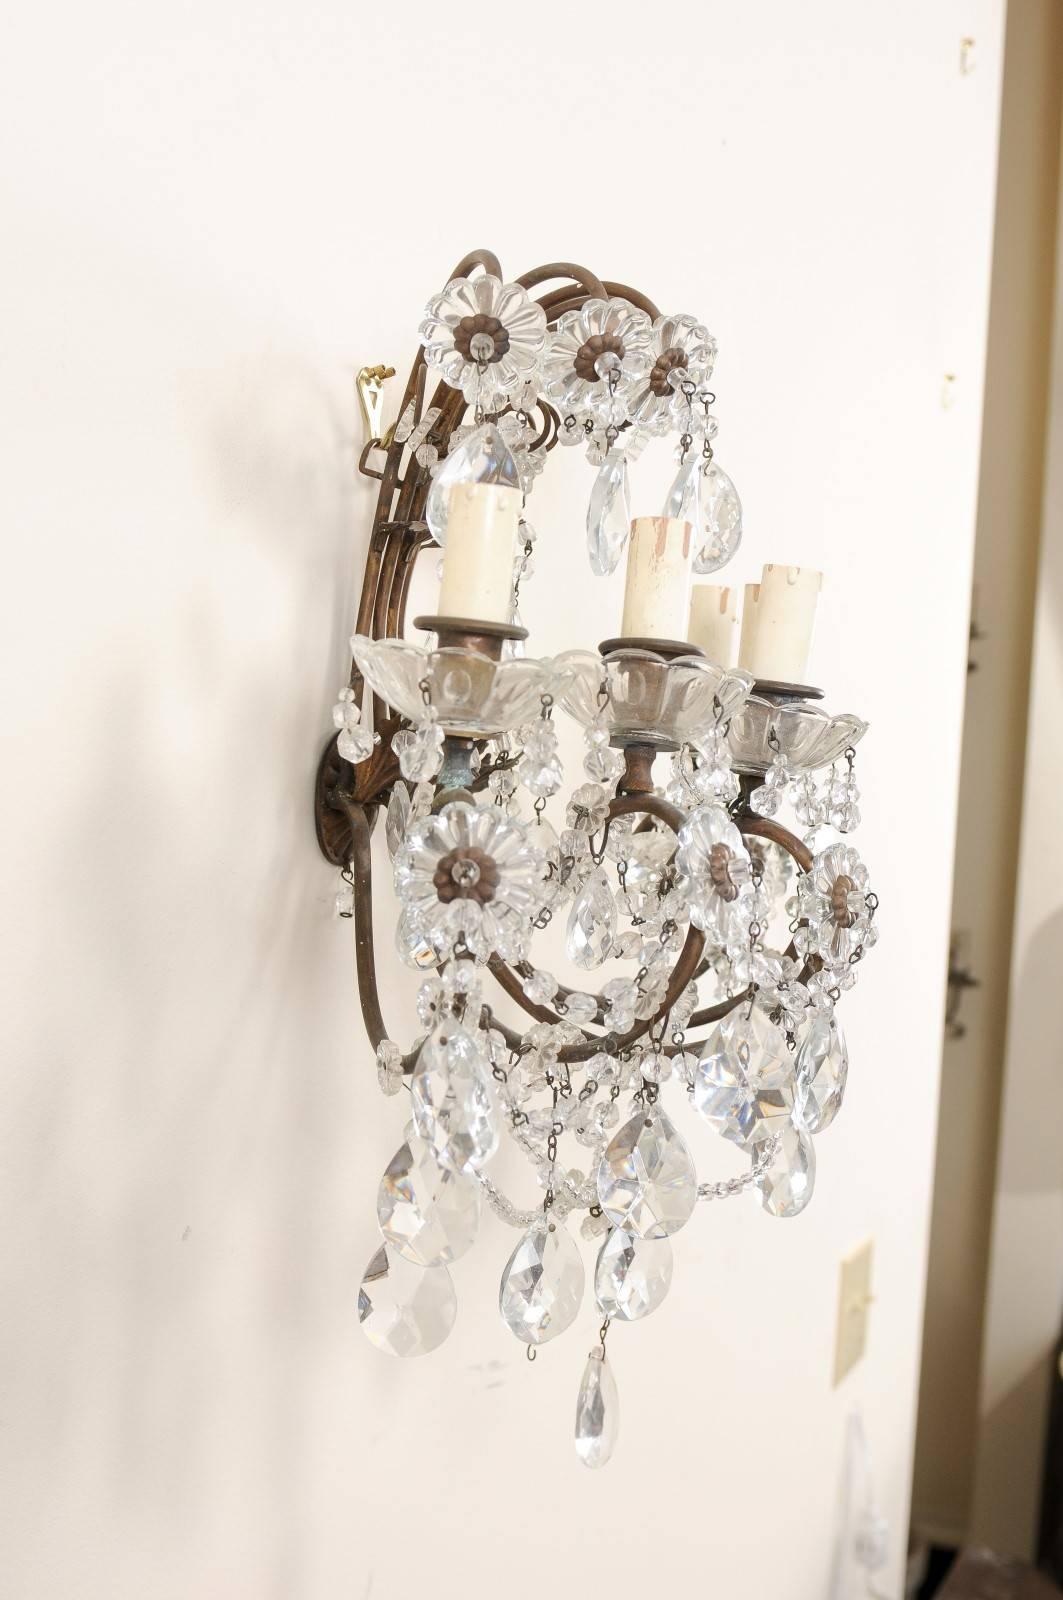 Pair of Italian Crystal Sconces w/ Waterfall Tops and Scrolling Metal Armature In Good Condition For Sale In Atlanta, GA